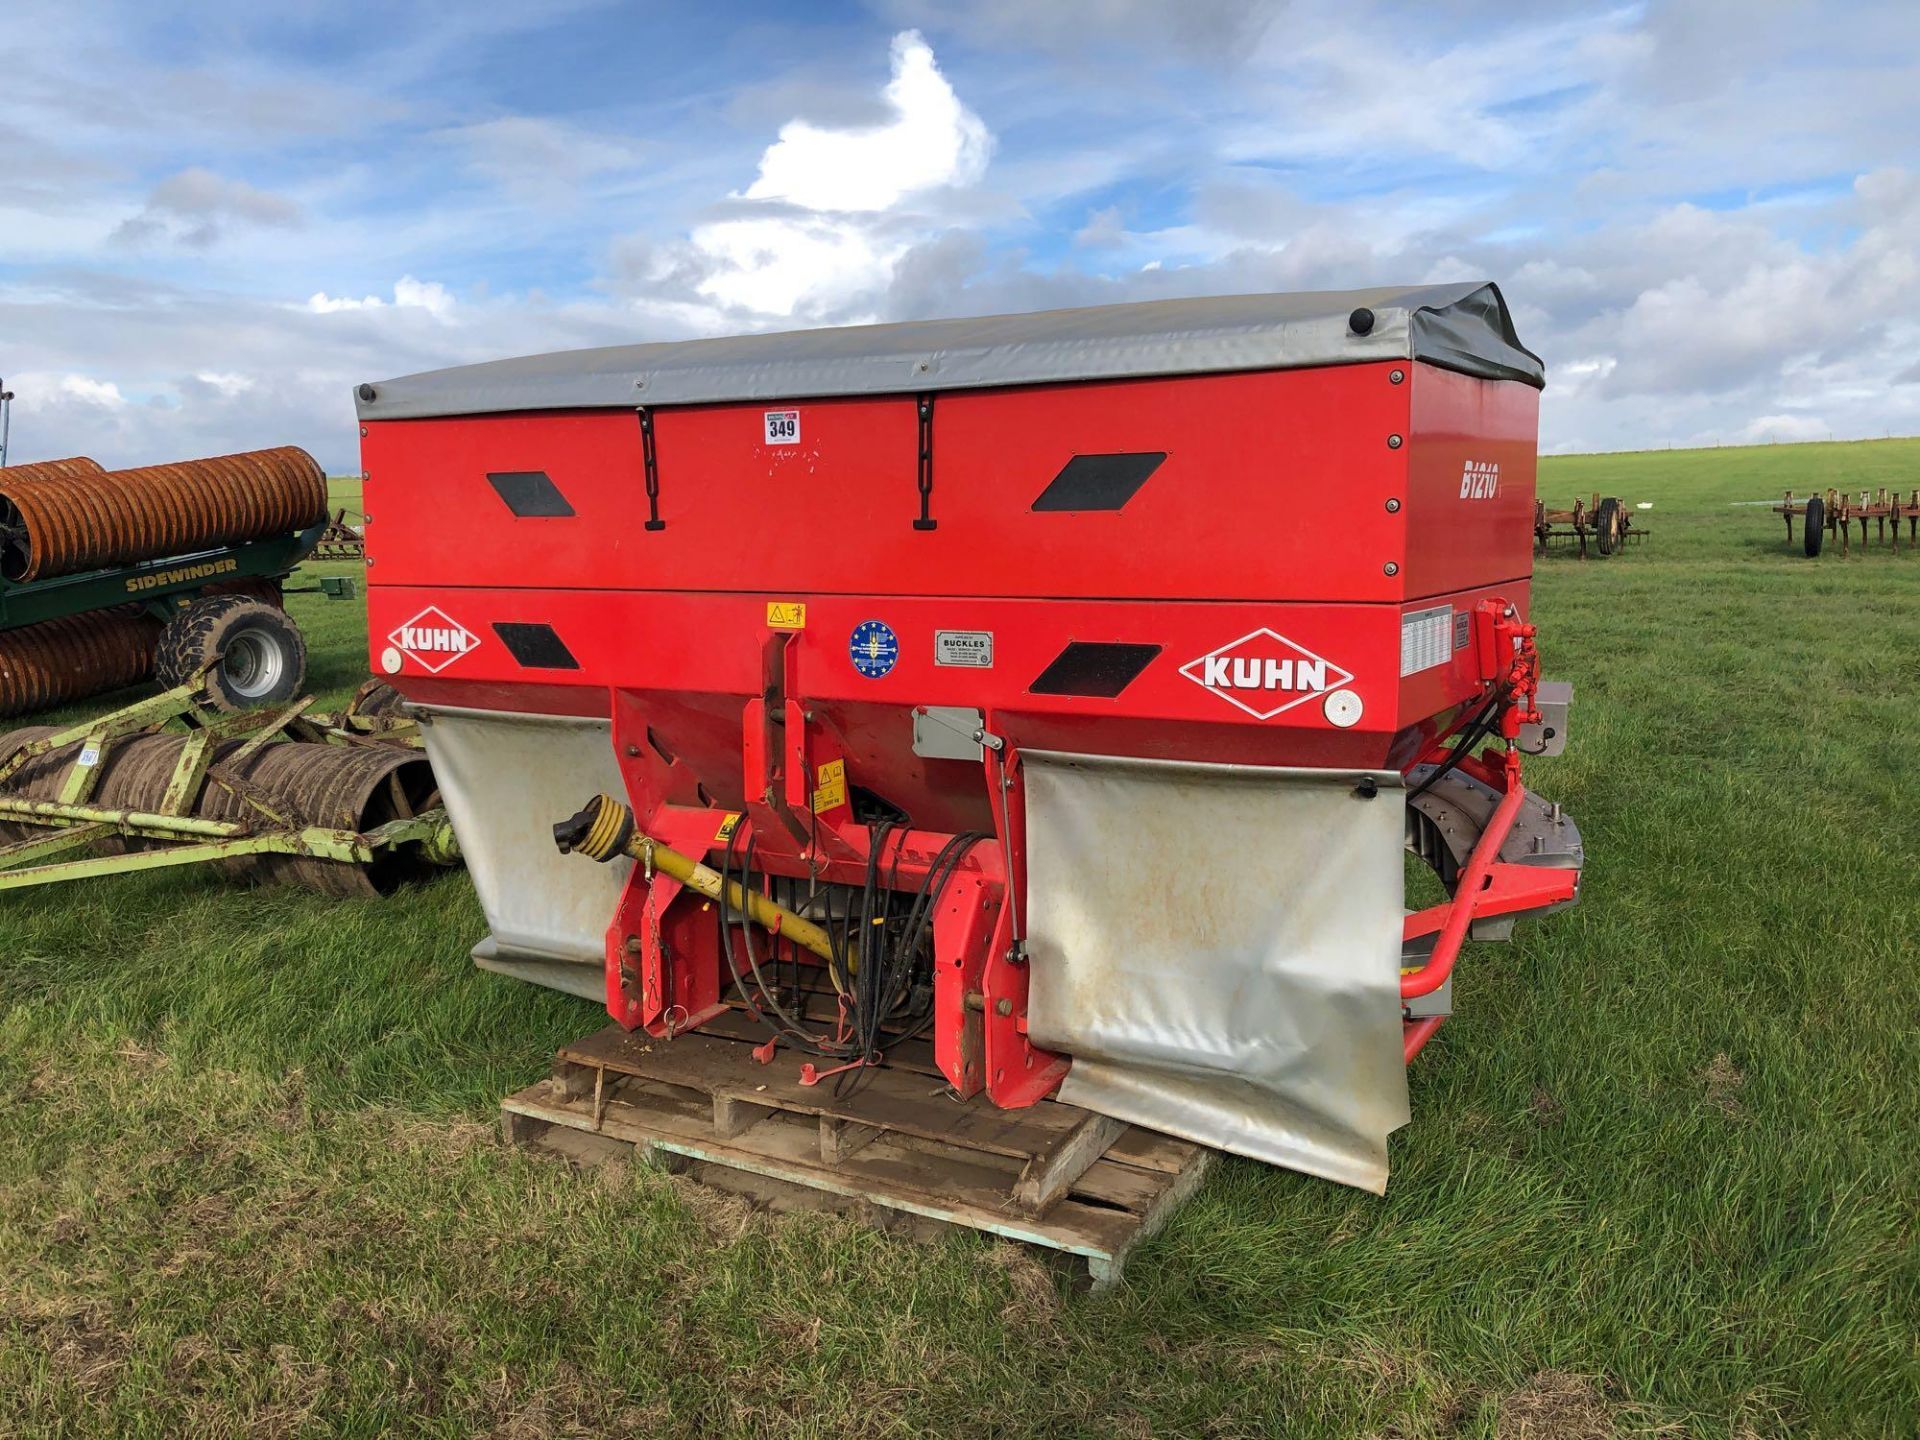 2003 Kuhn MDS1132 fertiliser spreader with Kuhn B1210 extension hopper and cover with headland limit